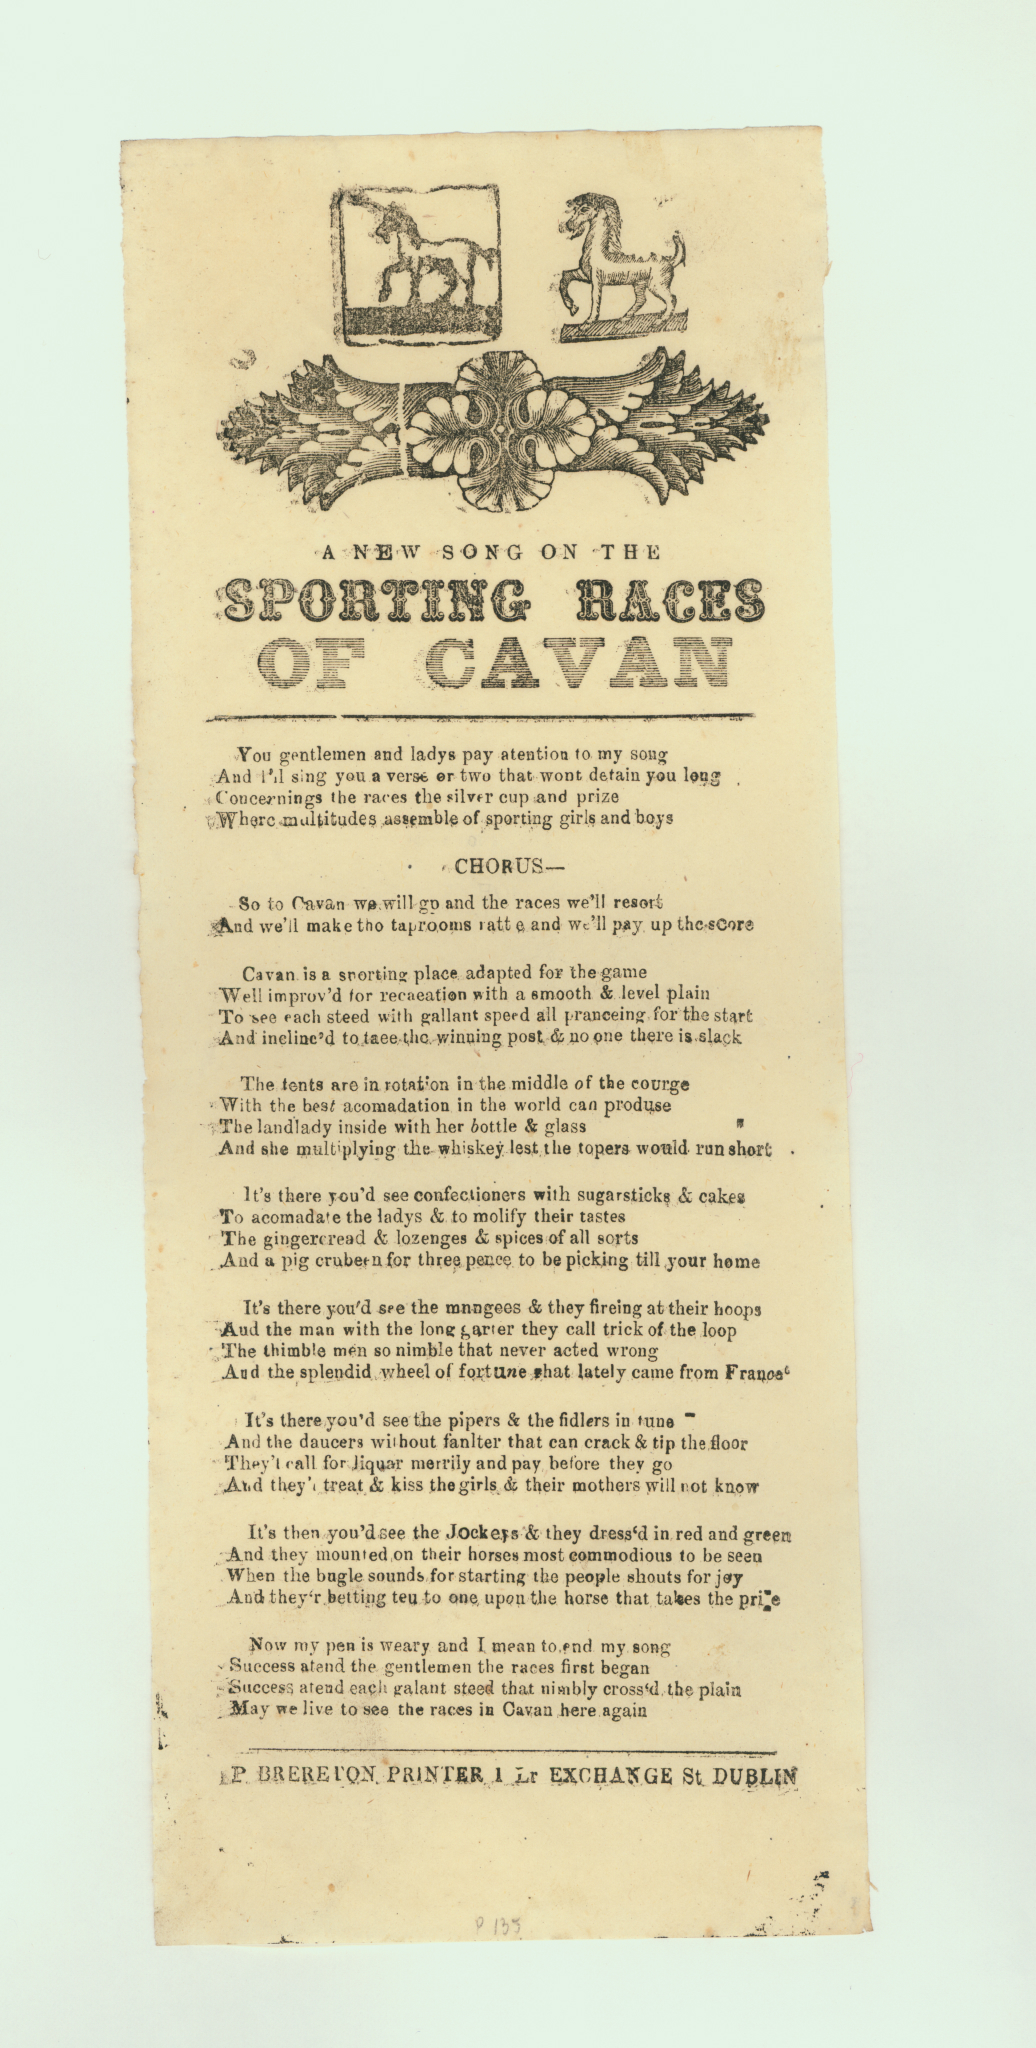 &quot;A New Song on the Sporting Races of Cavan&quot;